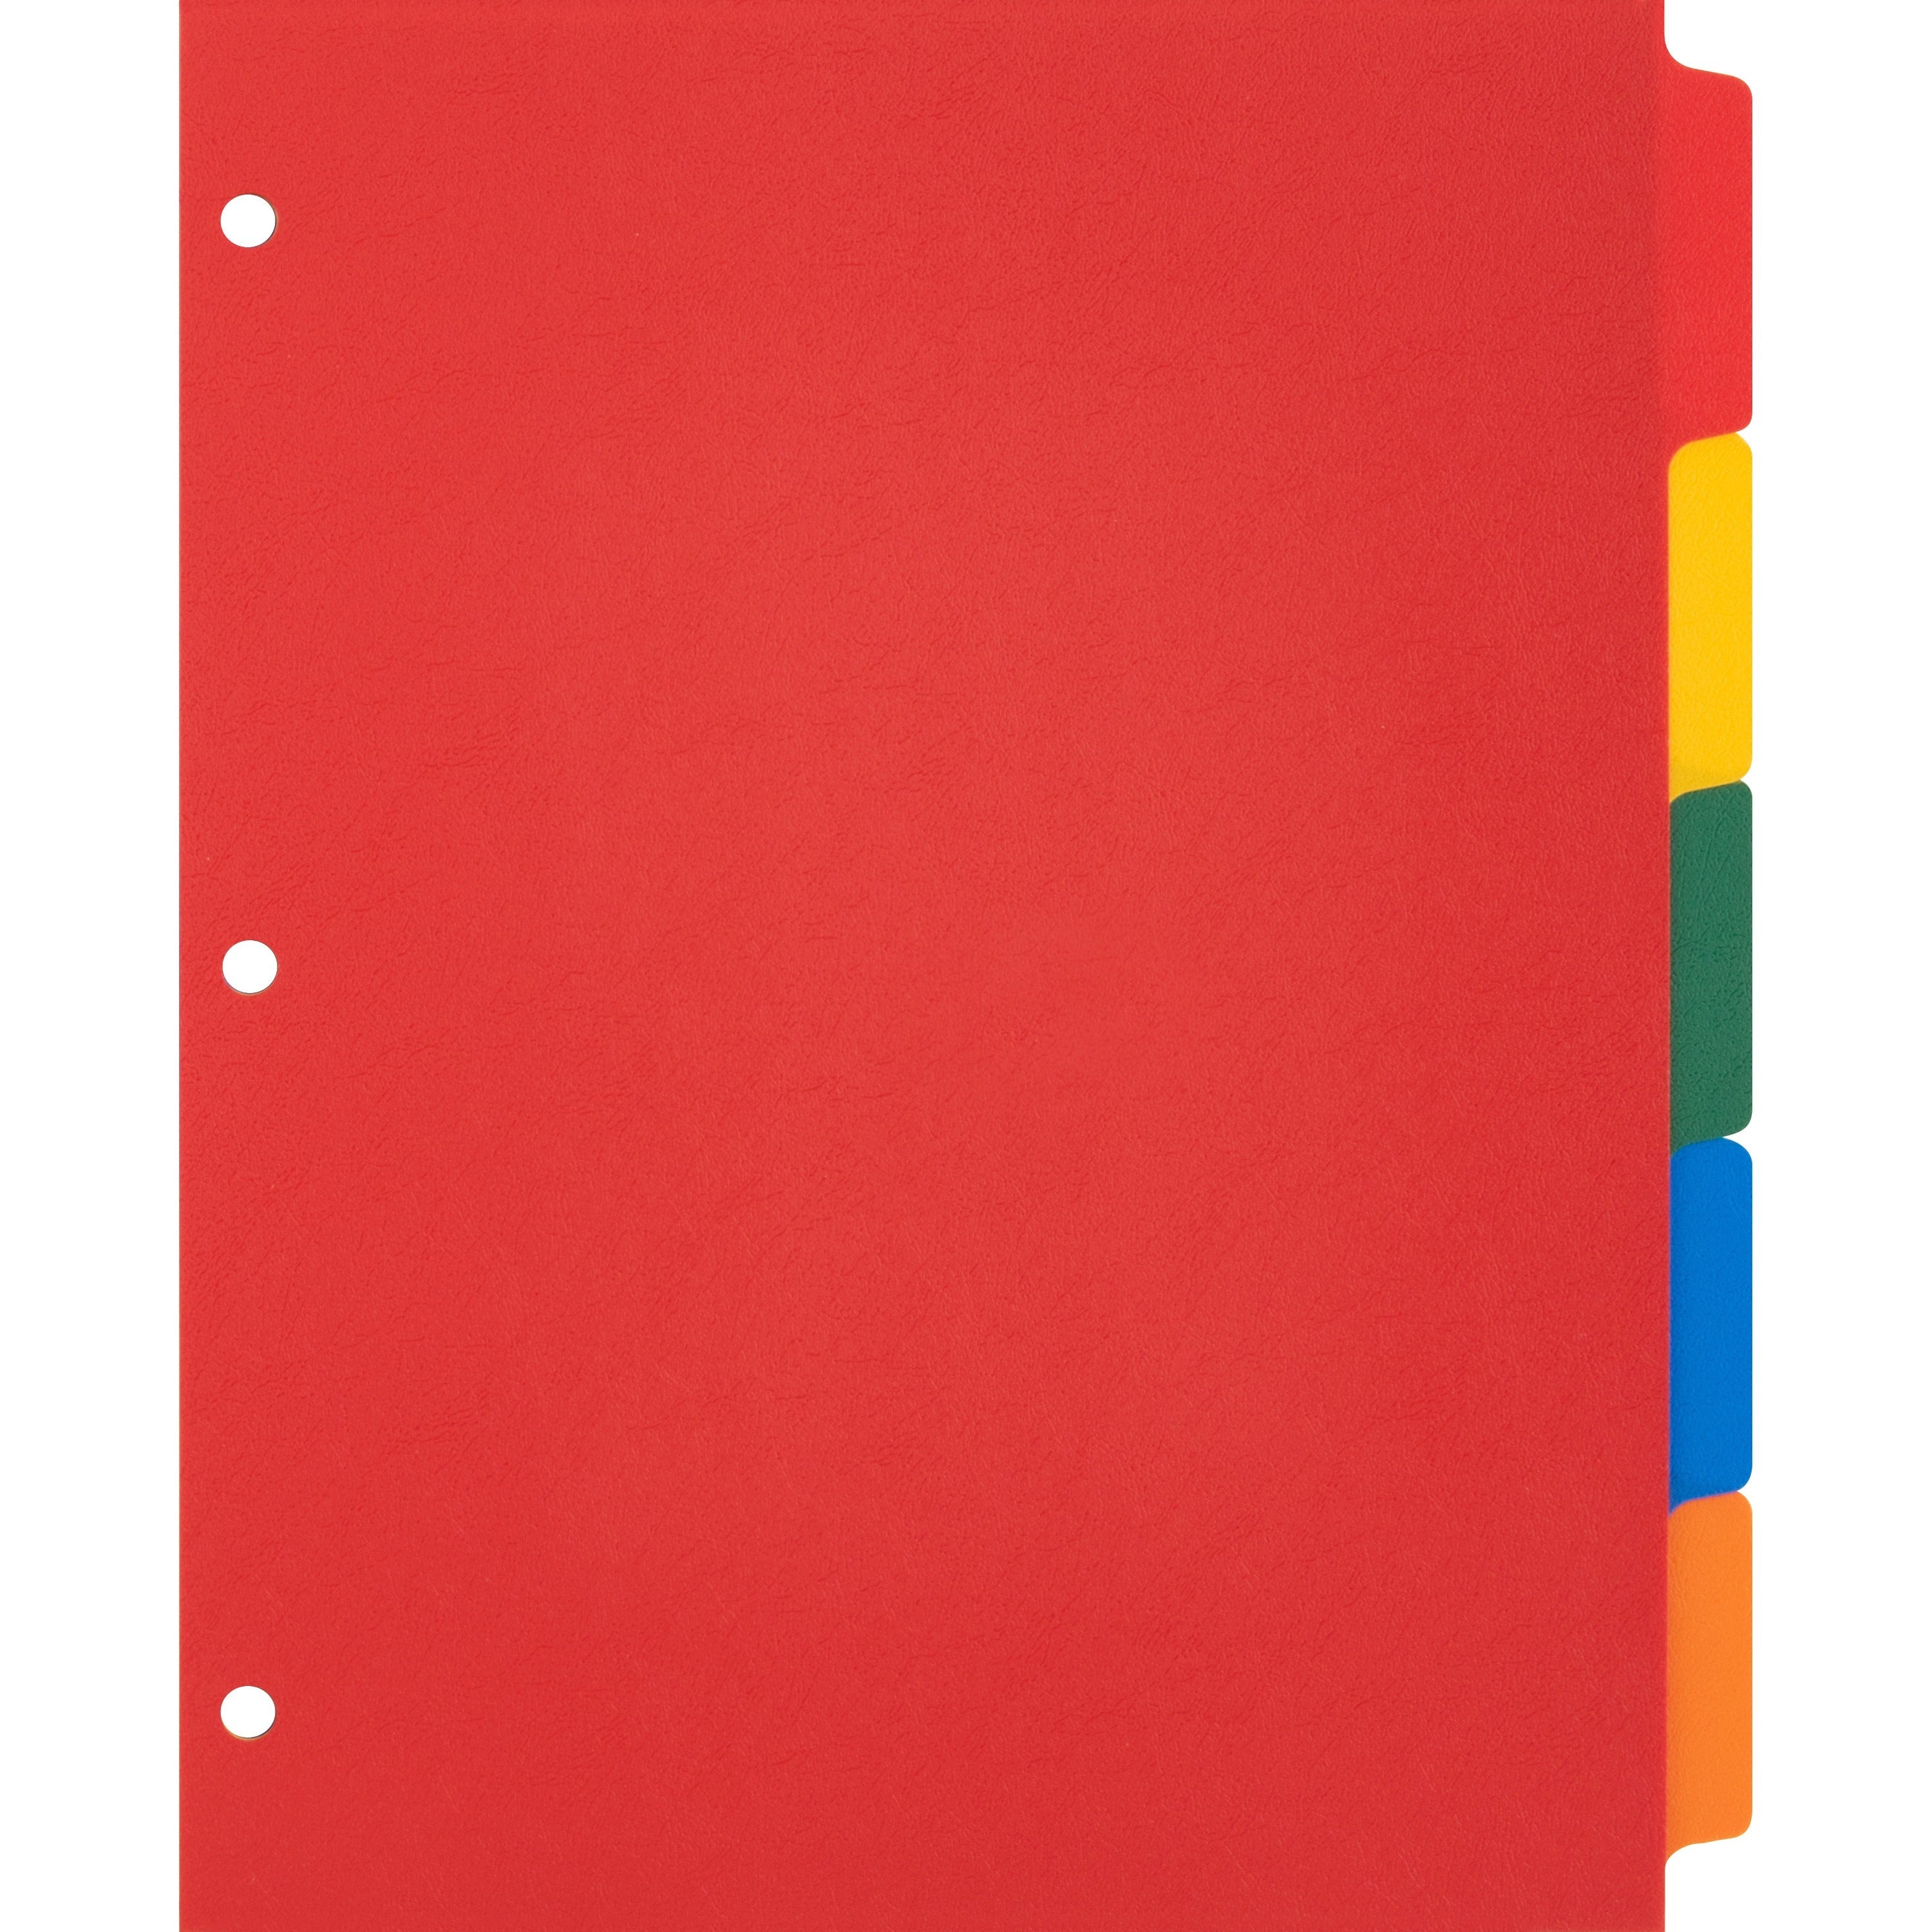 business-source-plain-tab-color-polyethylene-index-dividers-blank-tabs-5-tabs-set-85-divider-width-x-11-divider-length-letter-3-hole-punched-red-polyethylene-yellow-green-blue-orange-divider-red-polyethylene-yellow-green-b_bsn01809 - 1